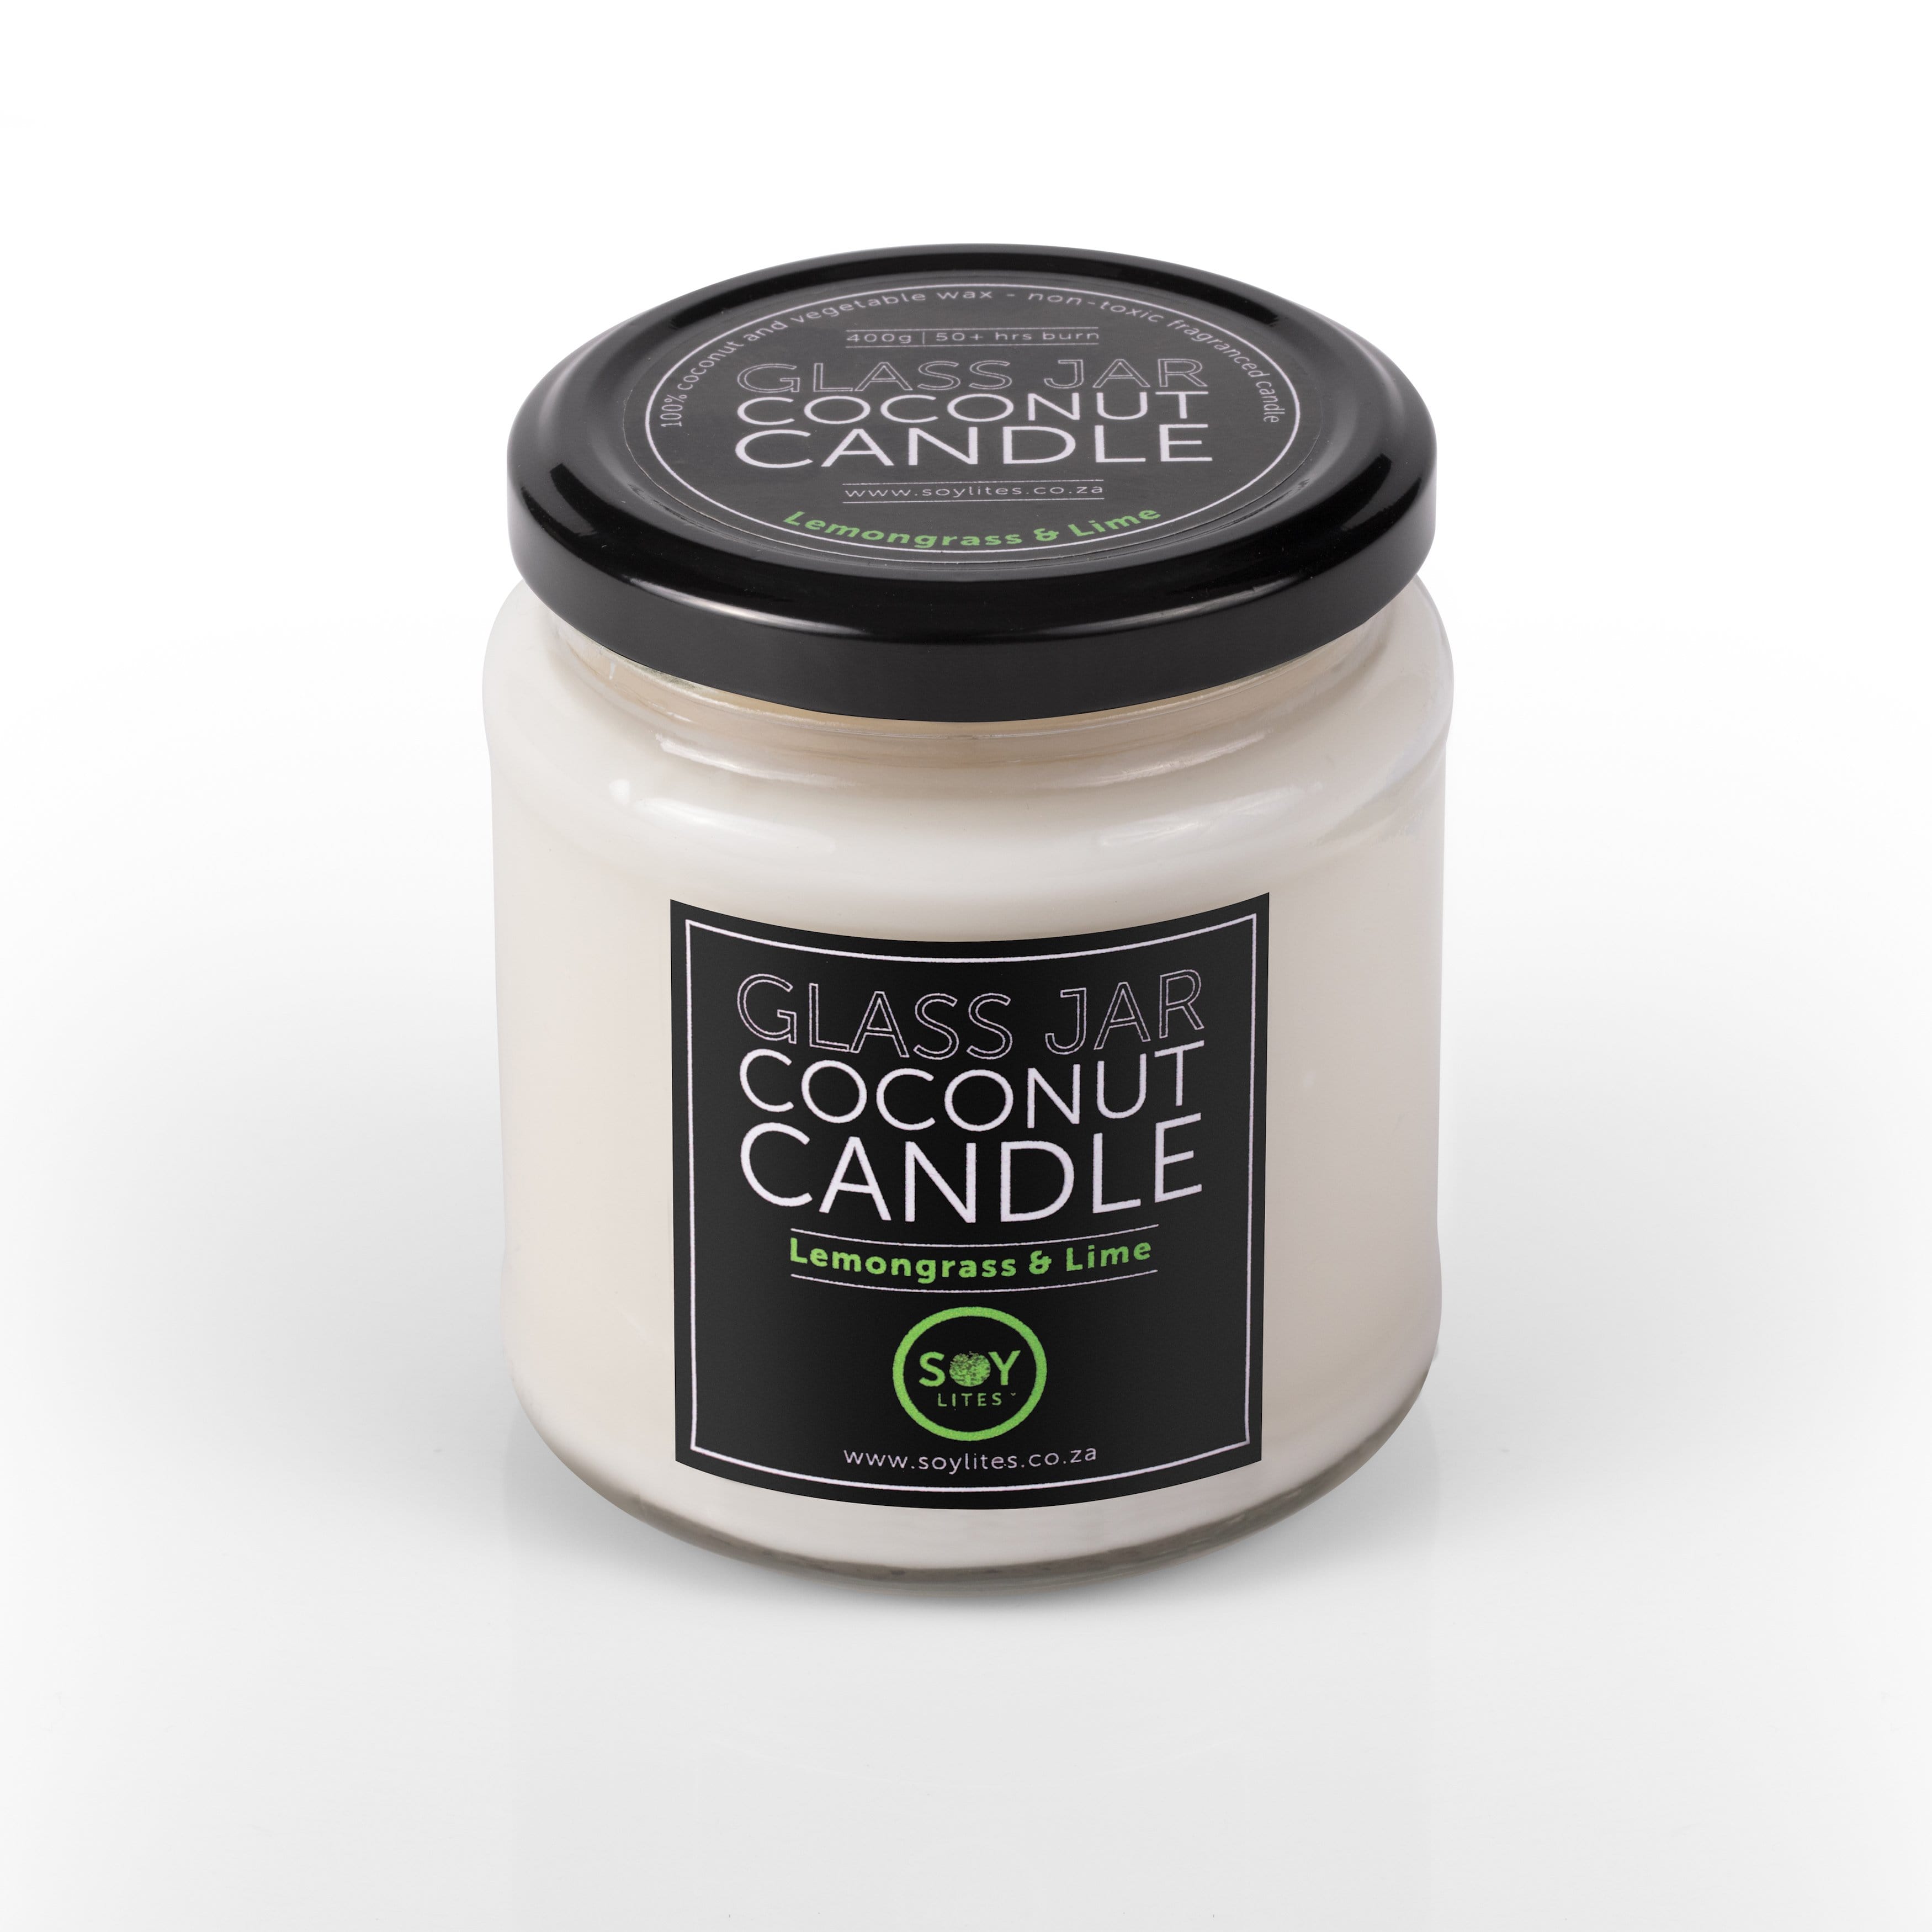 SoyLites Coconut Candle Coconut Candle with Lemongrass & Lime 200ml